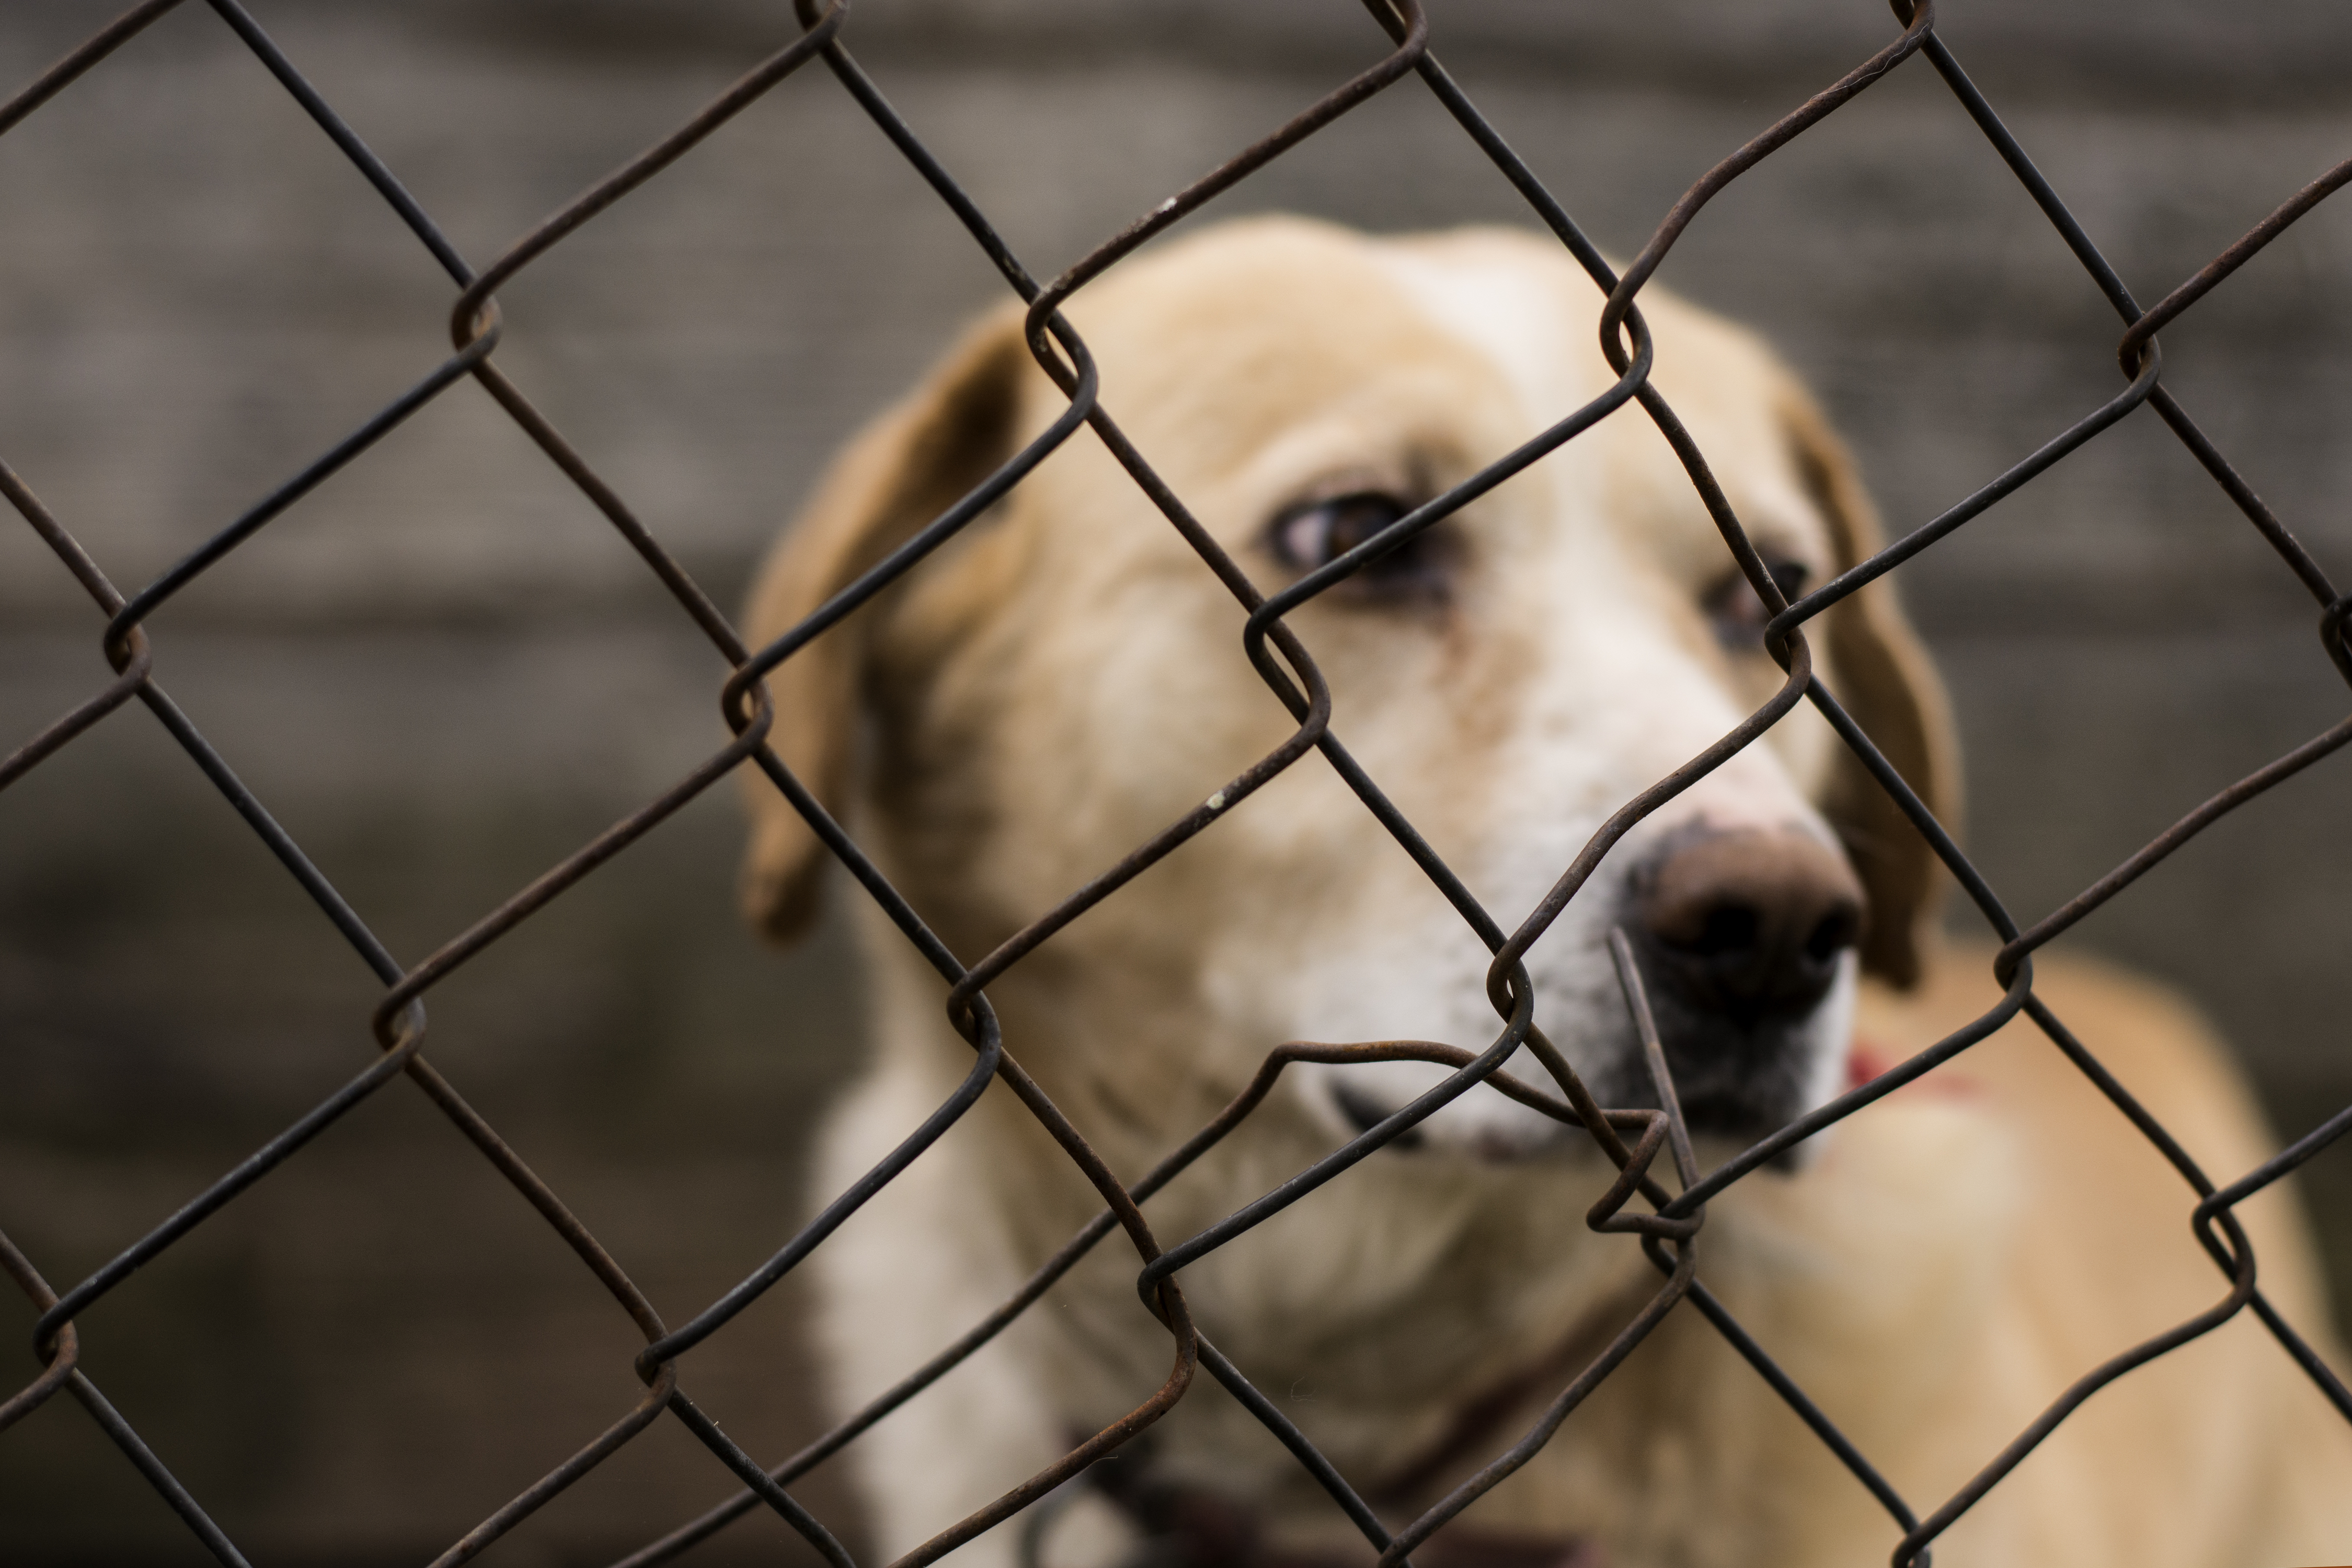 There's a new push to protect pets in Michigan: Do we need an animal abuse registry?